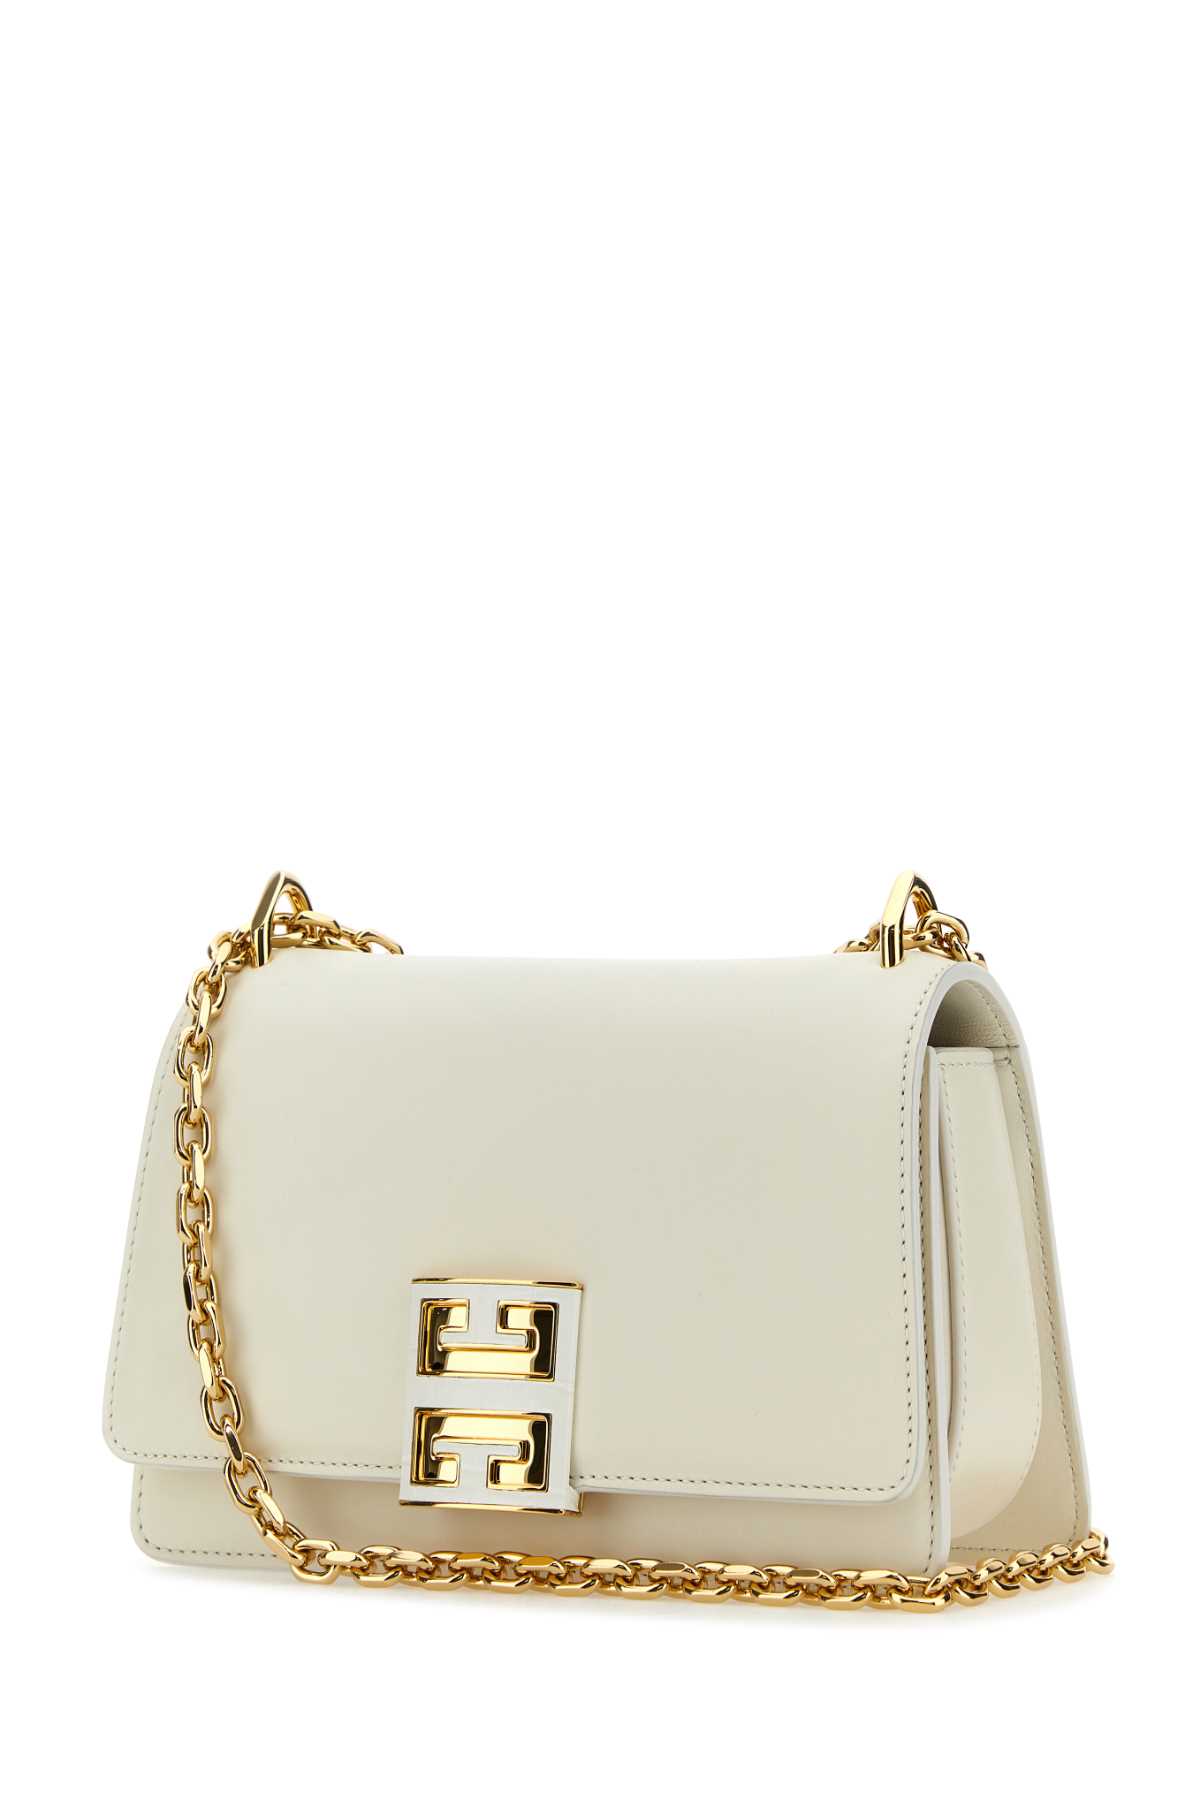 Givenchy Ivory Leather Small 4g Shoulder Bag